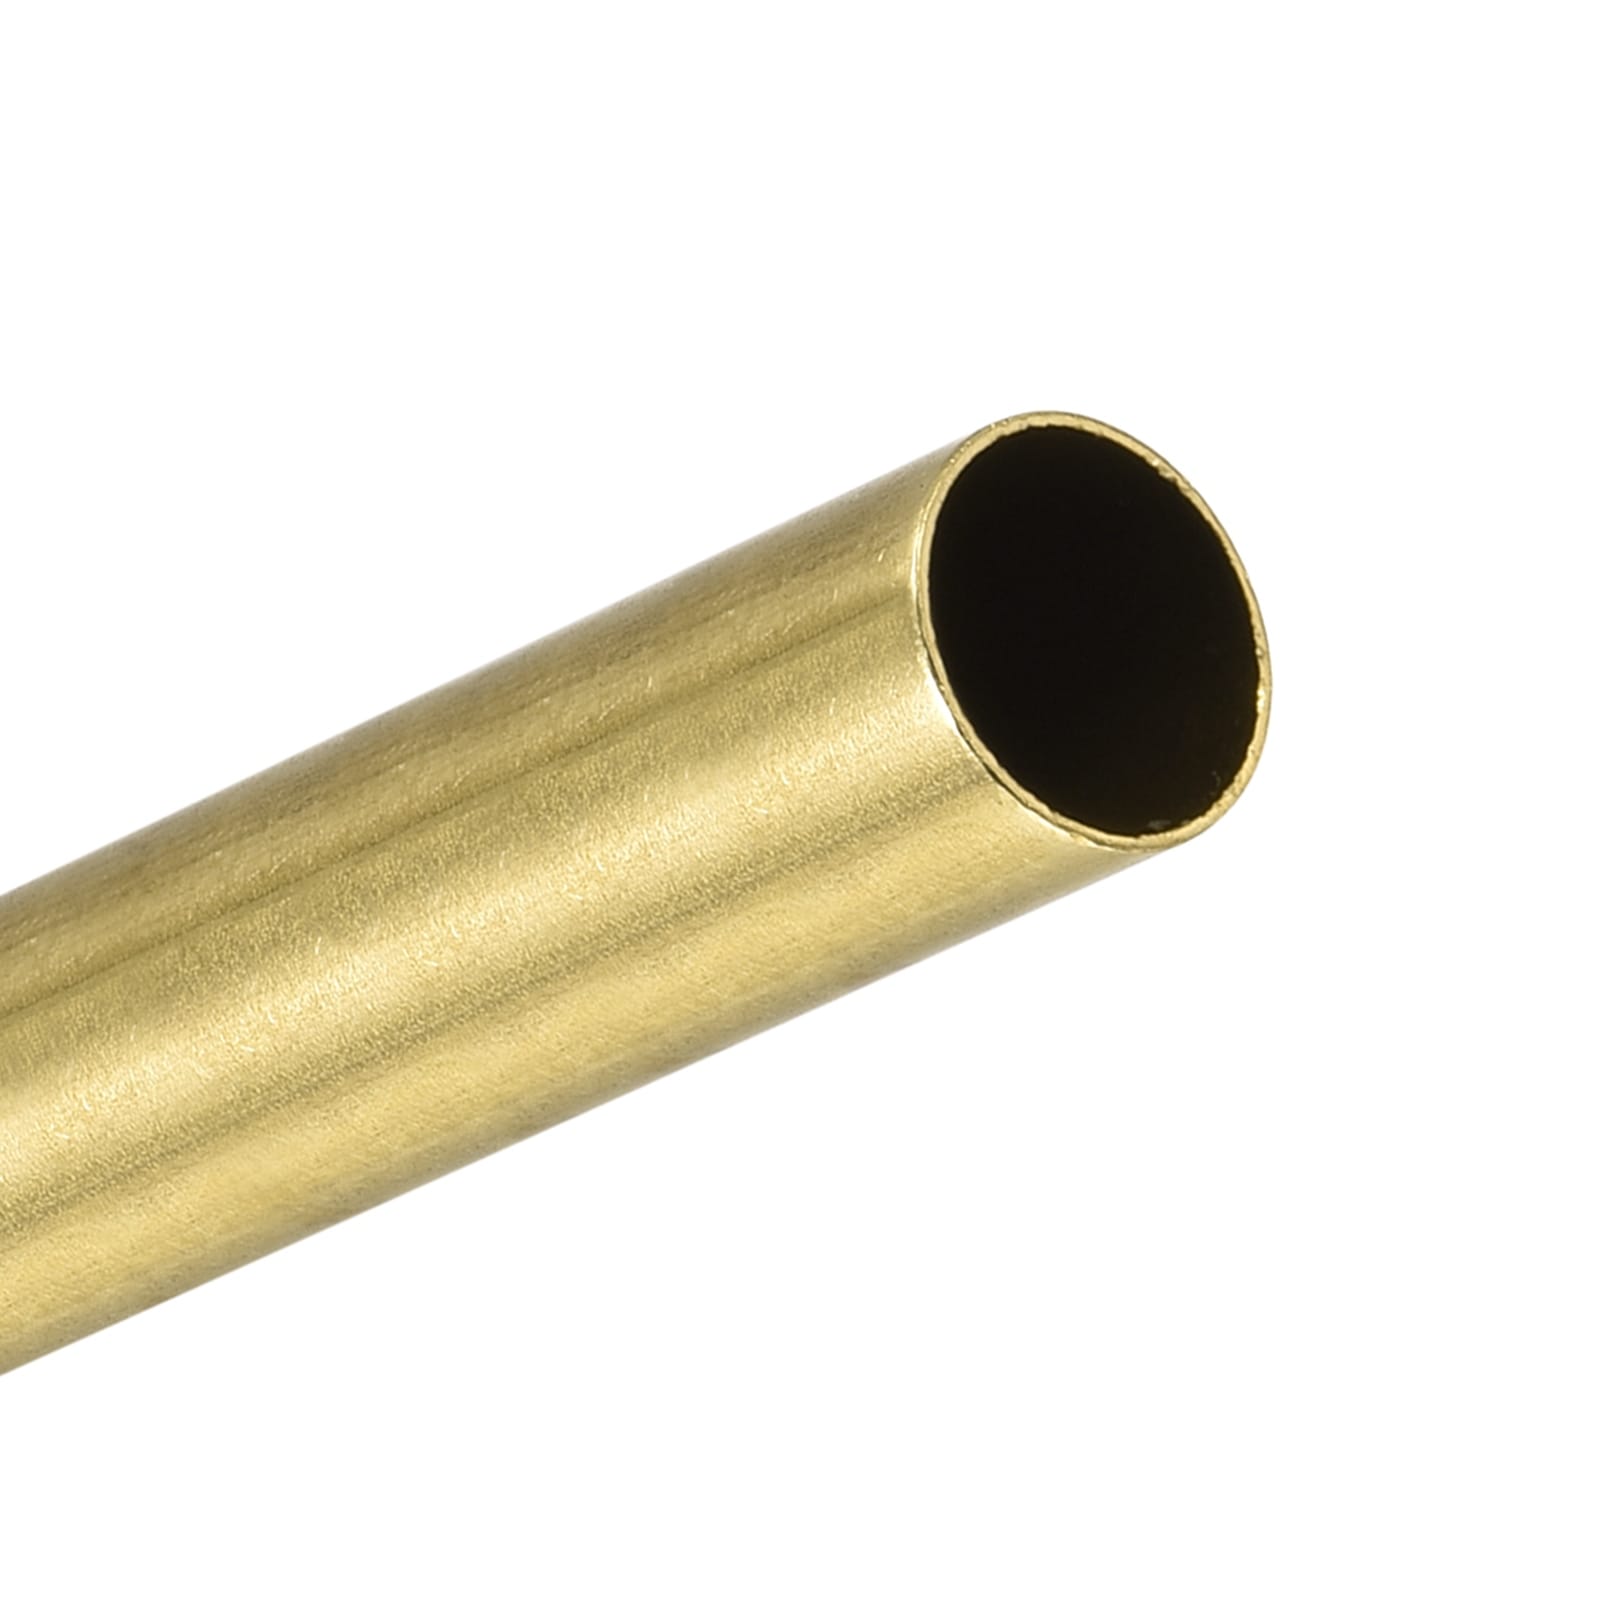 Brass Round Tube 19mm OD 0.5mm Wall Thickness 200mm Length Pipe Tubing -  Brass Tone - Bed Bath & Beyond - 36021070